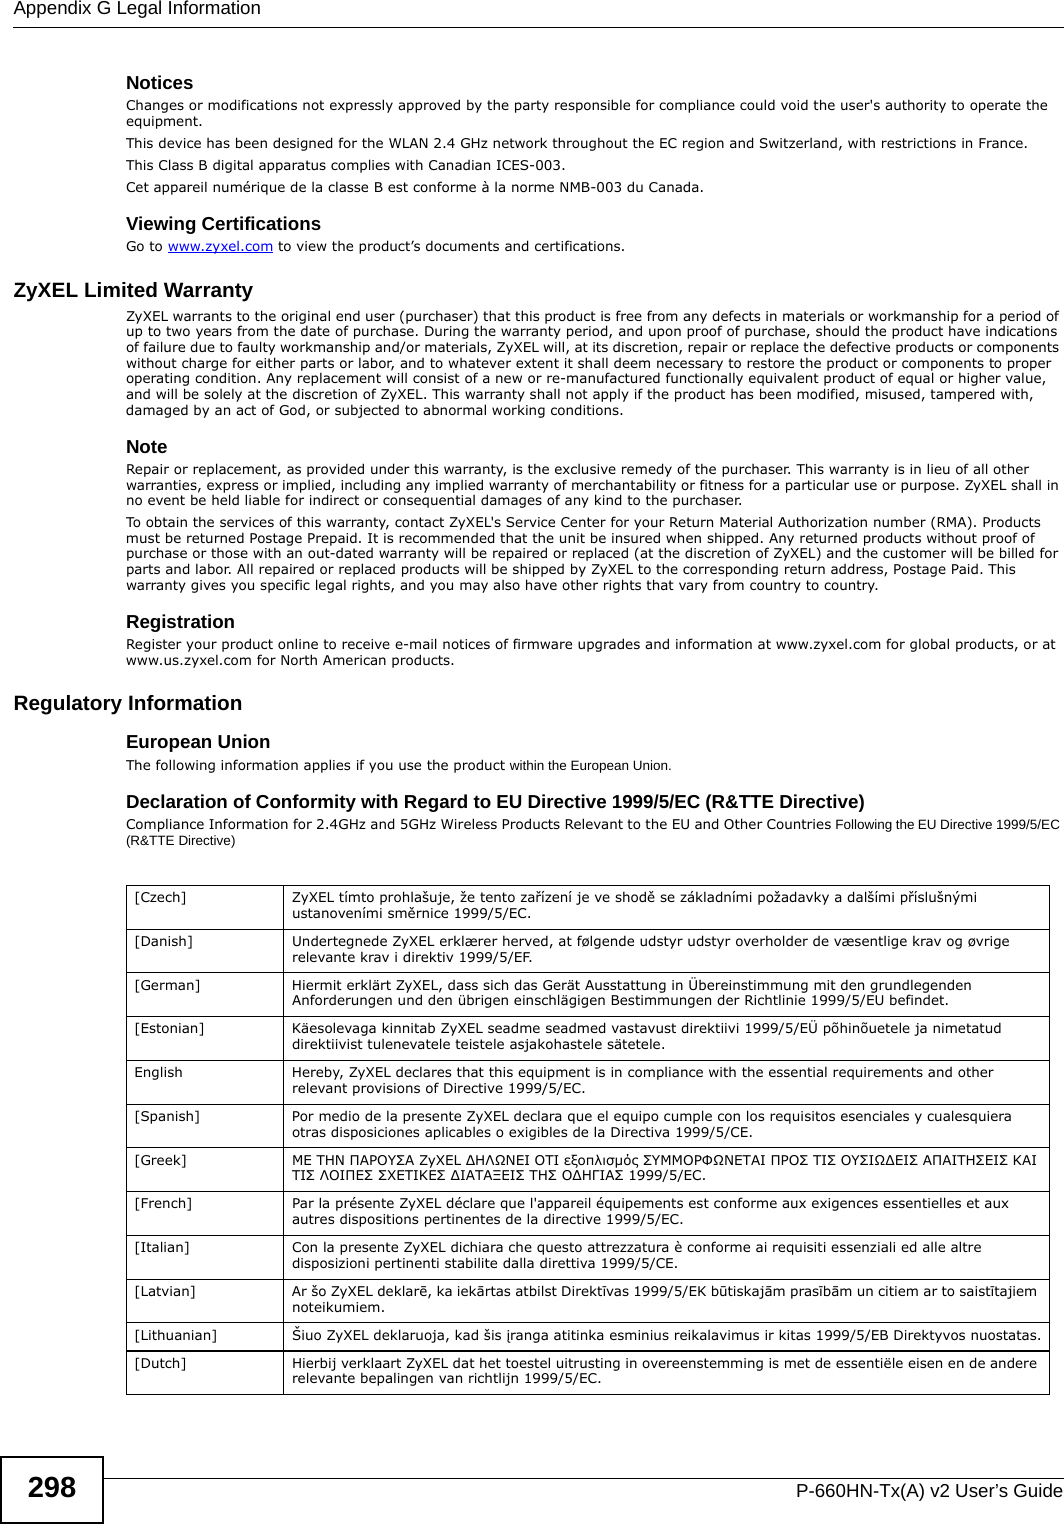 Appendix G Legal InformationP-660HN-Tx(A) v2 User’s Guide298Notices Changes or modifications not expressly approved by the party responsible for compliance could void the user&apos;s authority to operate the equipment.This device has been designed for the WLAN 2.4 GHz network throughout the EC region and Switzerland, with restrictions in France. This Class B digital apparatus complies with Canadian ICES-003.Cet appareil numérique de la classe B est conforme à la norme NMB-003 du Canada.Viewing CertificationsGo to www.zyxel.com to view the product’s documents and certifications.ZyXEL Limited WarrantyZyXEL warrants to the original end user (purchaser) that this product is free from any defects in materials or workmanship for a period of up to two years from the date of purchase. During the warranty period, and upon proof of purchase, should the product have indications of failure due to faulty workmanship and/or materials, ZyXEL will, at its discretion, repair or replace the defective products or components without charge for either parts or labor, and to whatever extent it shall deem necessary to restore the product or components to proper operating condition. Any replacement will consist of a new or re-manufactured functionally equivalent product of equal or higher value, and will be solely at the discretion of ZyXEL. This warranty shall not apply if the product has been modified, misused, tampered with, damaged by an act of God, or subjected to abnormal working conditions.NoteRepair or replacement, as provided under this warranty, is the exclusive remedy of the purchaser. This warranty is in lieu of all other warranties, express or implied, including any implied warranty of merchantability or fitness for a particular use or purpose. ZyXEL shall in no event be held liable for indirect or consequential damages of any kind to the purchaser.To obtain the services of this warranty, contact ZyXEL&apos;s Service Center for your Return Material Authorization number (RMA). Products must be returned Postage Prepaid. It is recommended that the unit be insured when shipped. Any returned products without proof of purchase or those with an out-dated warranty will be repaired or replaced (at the discretion of ZyXEL) and the customer will be billed for parts and labor. All repaired or replaced products will be shipped by ZyXEL to the corresponding return address, Postage Paid. This warranty gives you specific legal rights, and you may also have other rights that vary from country to country.RegistrationRegister your product online to receive e-mail notices of firmware upgrades and information at www.zyxel.com for global products, or at www.us.zyxel.com for North American products.Regulatory InformationEuropean UnionThe following information applies if you use the product within the European Union.Declaration of Conformity with Regard to EU Directive 1999/5/EC (R&amp;TTE Directive)Compliance Information for 2.4GHz and 5GHz Wireless Products Relevant to the EU and Other Countries Following the EU Directive 1999/5/EC (R&amp;TTE Directive) [Czech] ZyXEL tímto prohlašuje, že tento zařízení je ve shodě se základními požadavky a dalšími příslušnými ustanoveními směrnice 1999/5/EC.[Danish] Undertegnede ZyXEL erklærer herved, at følgende udstyr udstyr overholder de væsentlige krav og øvrige relevante krav i direktiv 1999/5/EF.[German] Hiermit erklärt ZyXEL, dass sich das Gerät Ausstattung in Übereinstimmung mit den grundlegenden Anforderungen und den übrigen einschlägigen Bestimmungen der Richtlinie 1999/5/EU befindet.[Estonian] Käesolevaga kinnitab ZyXEL seadme seadmed vastavust direktiivi 1999/5/EÜ põhinõuetele ja nimetatud direktiivist tulenevatele teistele asjakohastele sätetele.English Hereby, ZyXEL declares that this equipment is in compliance with the essential requirements and other relevant provisions of Directive 1999/5/EC.[Spanish] Por medio de la presente ZyXEL declara que el equipo cumple con los requisitos esenciales y cualesquiera otras disposiciones aplicables o exigibles de la Directiva 1999/5/CE.[Greek] ΜΕ ΤΗΝ ΠΑΡΟΥΣΑ ZyXEL ΔΗΛΩΝΕΙ ΟΤΙ εξοπλισμός ΣΥΜΜΟΡΦΩΝΕΤΑΙ ΠΡΟΣ ΤΙΣ ΟΥΣΙΩΔΕΙΣ ΑΠΑΙΤΗΣΕΙΣ ΚΑΙ ΤΙΣ ΛΟΙΠΕΣ ΣΧΕΤΙΚΕΣ ΔΙΑΤΑΞΕΙΣ ΤΗΣ ΟΔΗΓΙΑΣ 1999/5/ΕC.[French] Par la présente ZyXEL déclare que l&apos;appareil équipements est conforme aux exigences essentielles et aux autres dispositions pertinentes de la directive 1999/5/EC.[Italian] Con la presente ZyXEL dichiara che questo attrezzatura è conforme ai requisiti essenziali ed alle altre disposizioni pertinenti stabilite dalla direttiva 1999/5/CE.[Latvian] Ar šo ZyXEL deklarē, ka iekārtas atbilst Direktīvas 1999/5/EK būtiskajām prasībām un citiem ar to saistītajiem noteikumiem.[Lithuanian]  Šiuo ZyXEL deklaruoja, kad šis įranga atitinka esminius reikalavimus ir kitas 1999/5/EB Direktyvos nuostatas.[Dutch] Hierbij verklaart ZyXEL dat het toestel uitrusting in overeenstemming is met de essentiële eisen en de andere relevante bepalingen van richtlijn 1999/5/EC.